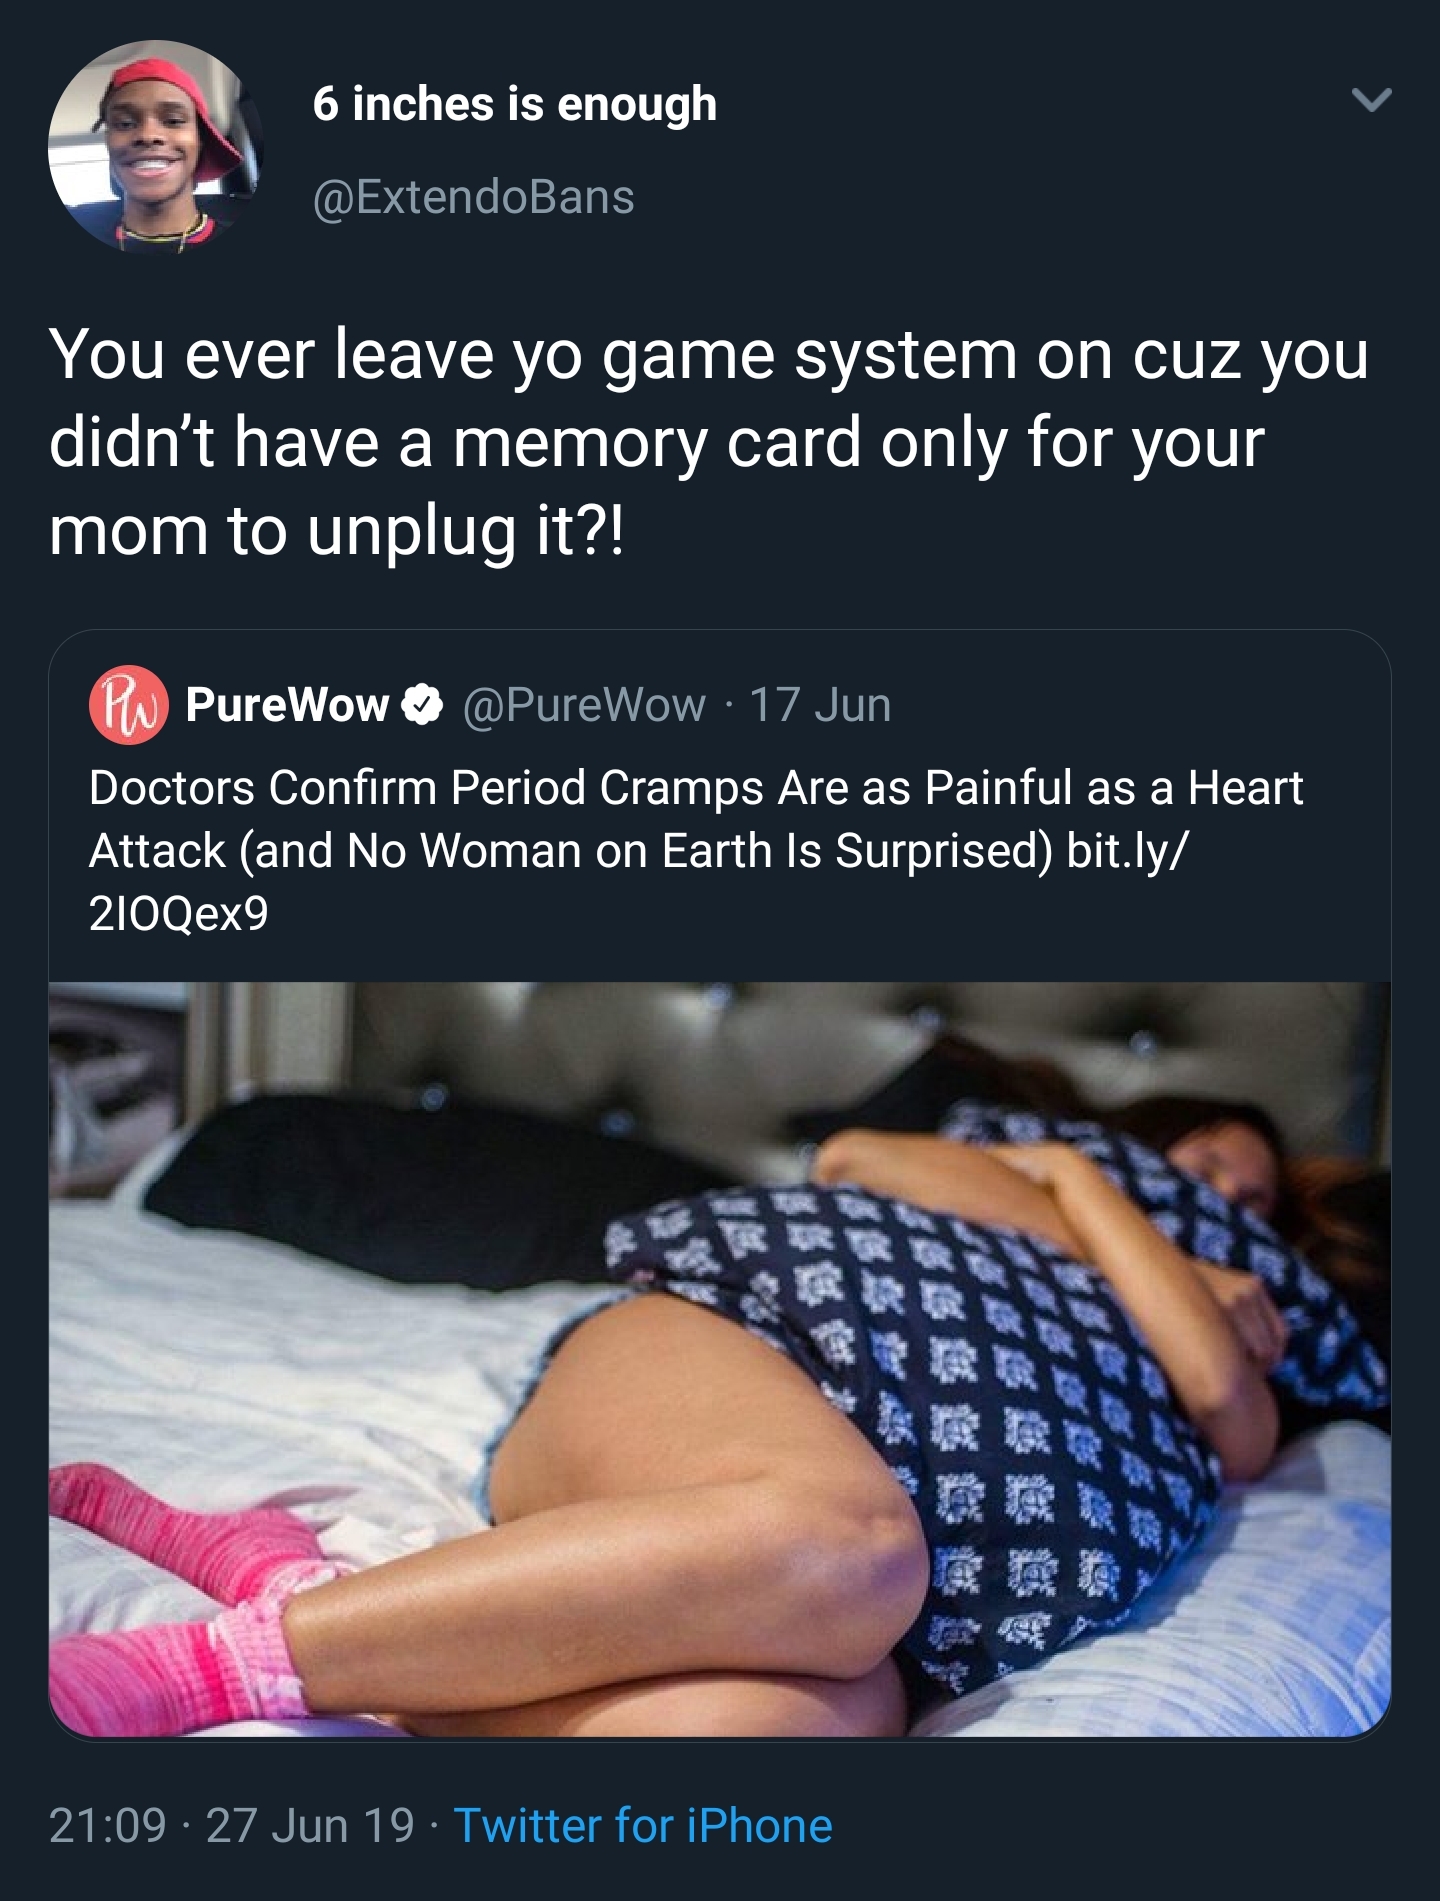 black twitter - 6 inches is enough You ever leave yo game system on cuz you didn't have a memory card only for your mom to unplug it?! Pla PureWow 17 Jun Doctors Confirm Period Cramps Are as Painful as a Heart Attack and No Woman on Earth Is Surprised